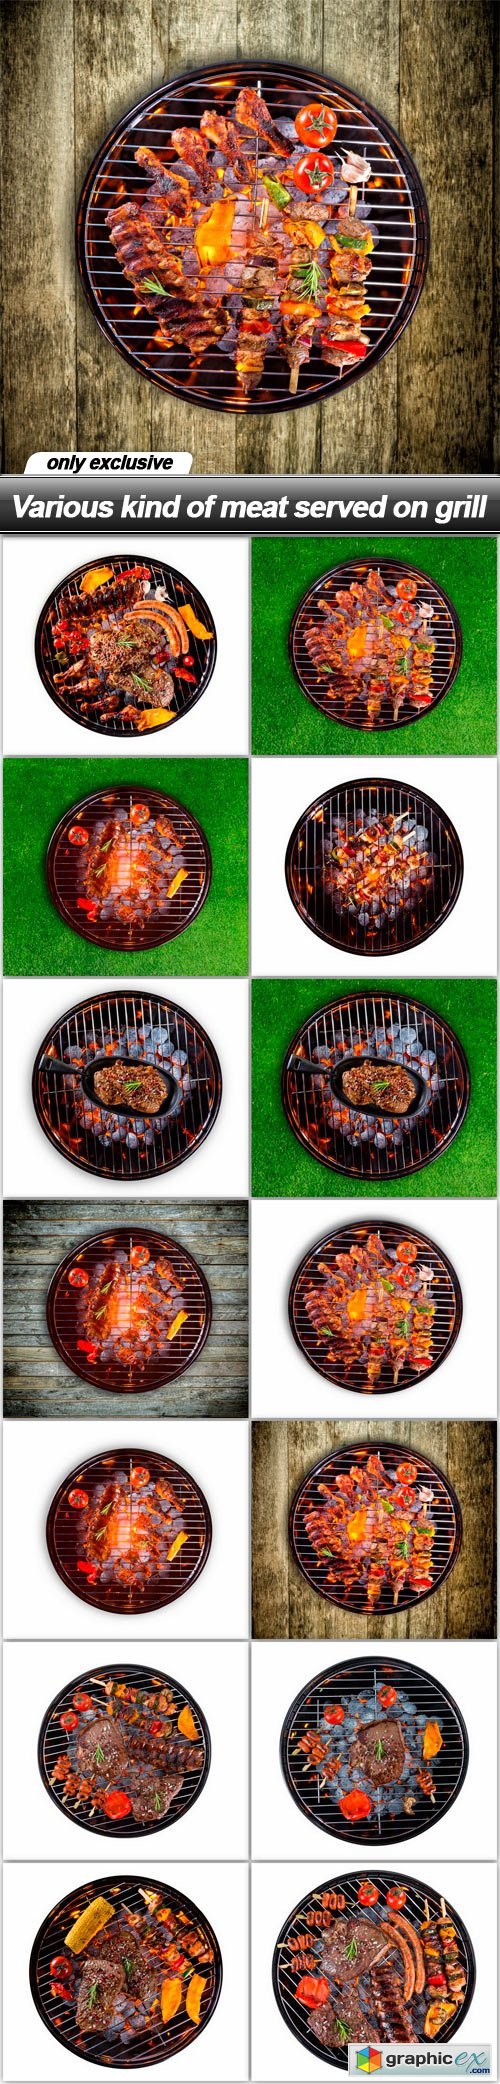 Various kind of meat served on grill - 14 UHQ JPEG